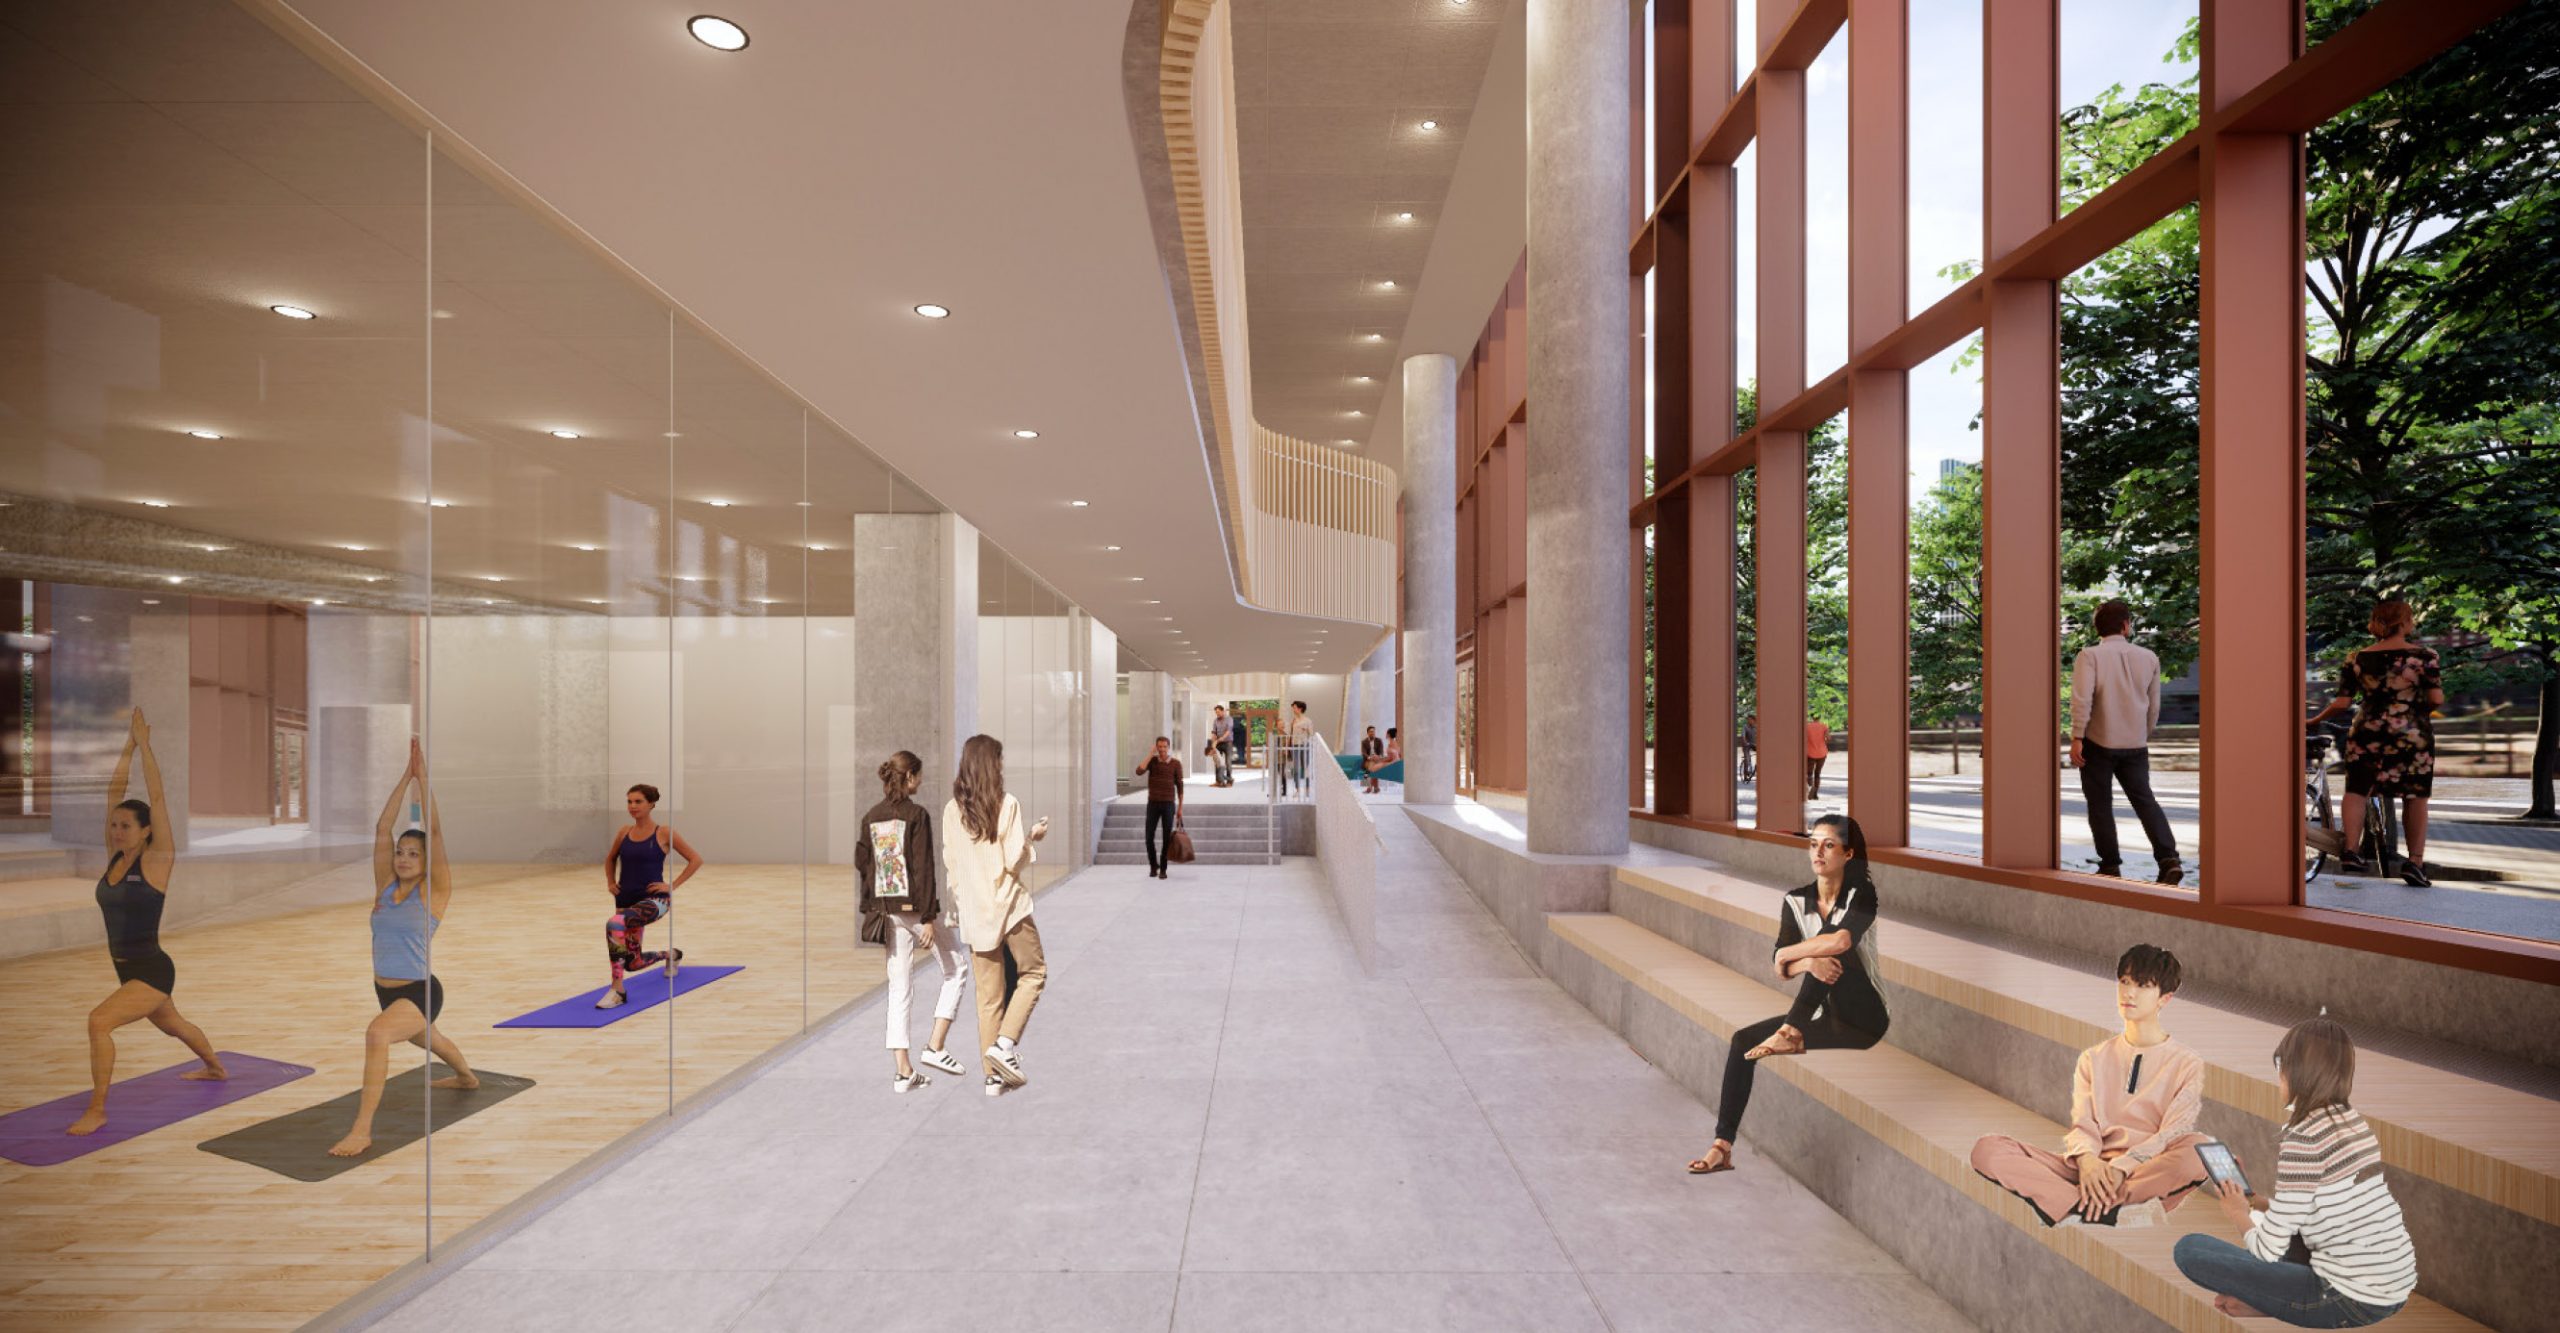 An illustration of the community recreation centre studio space, which shows people doing yoga in a room with a glass wall, which can be seen from the building hallway.